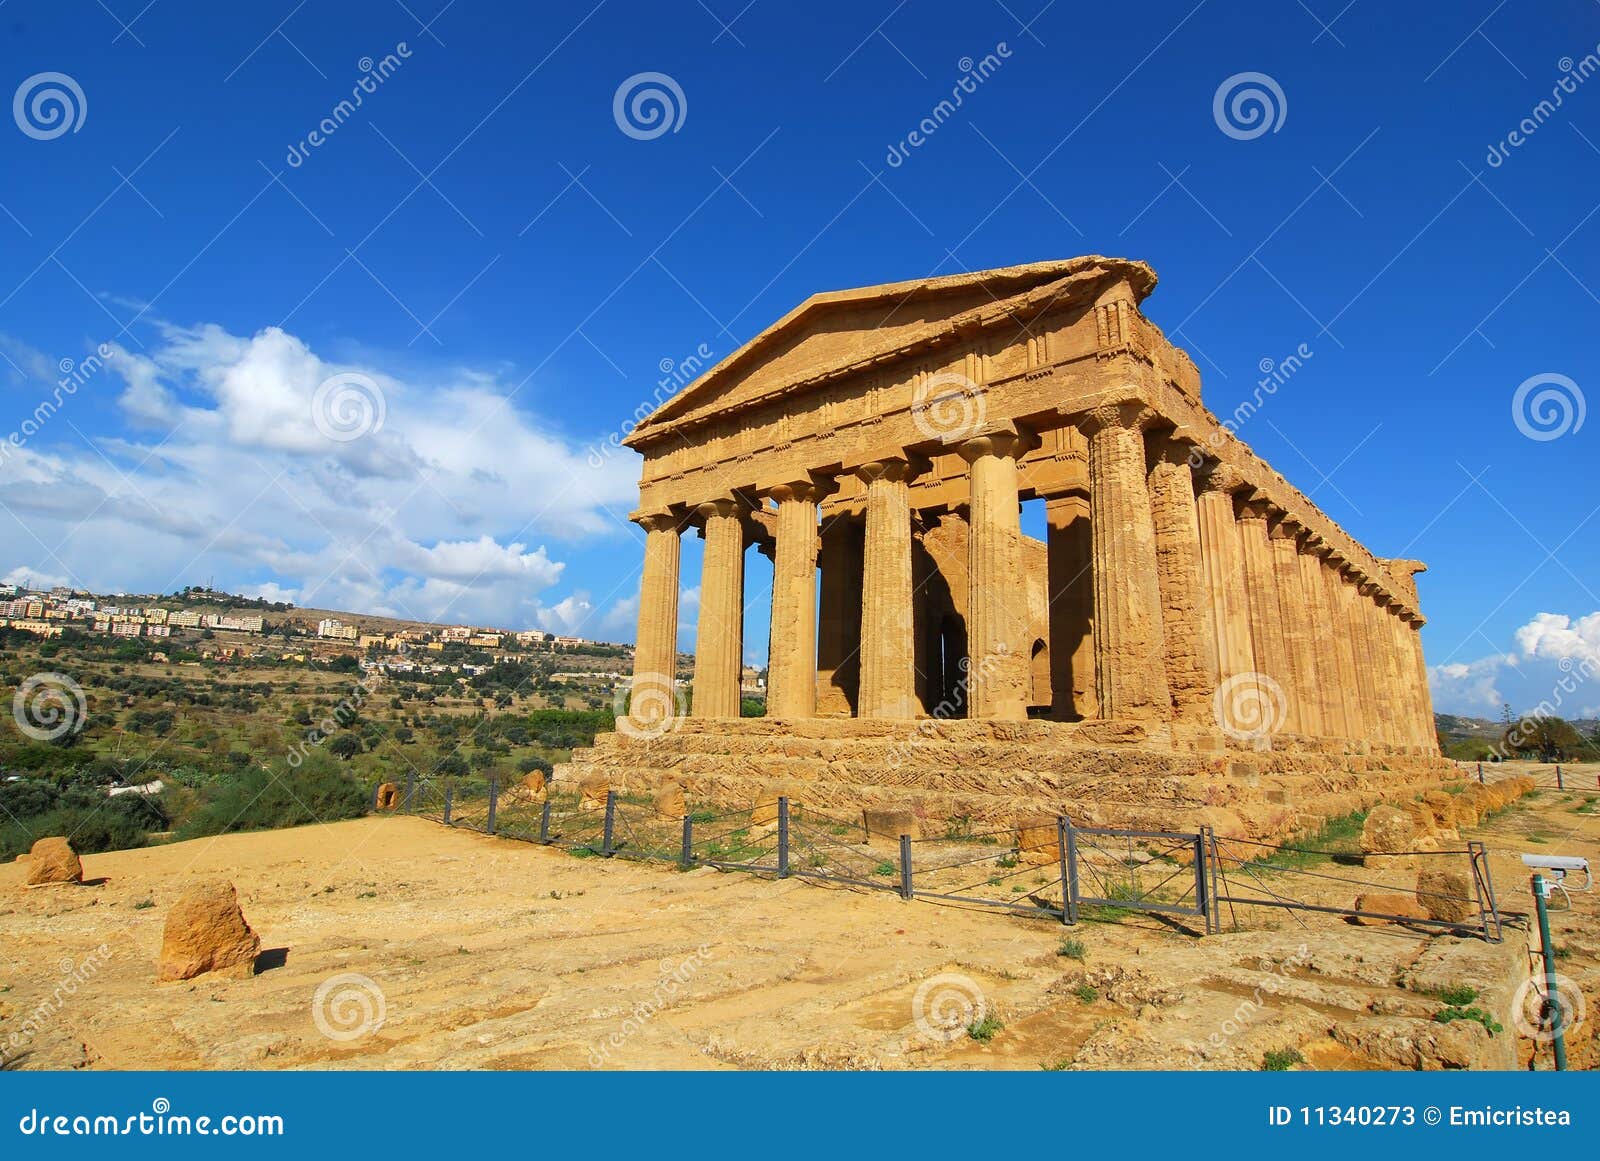 agrigento greek temple in sicily